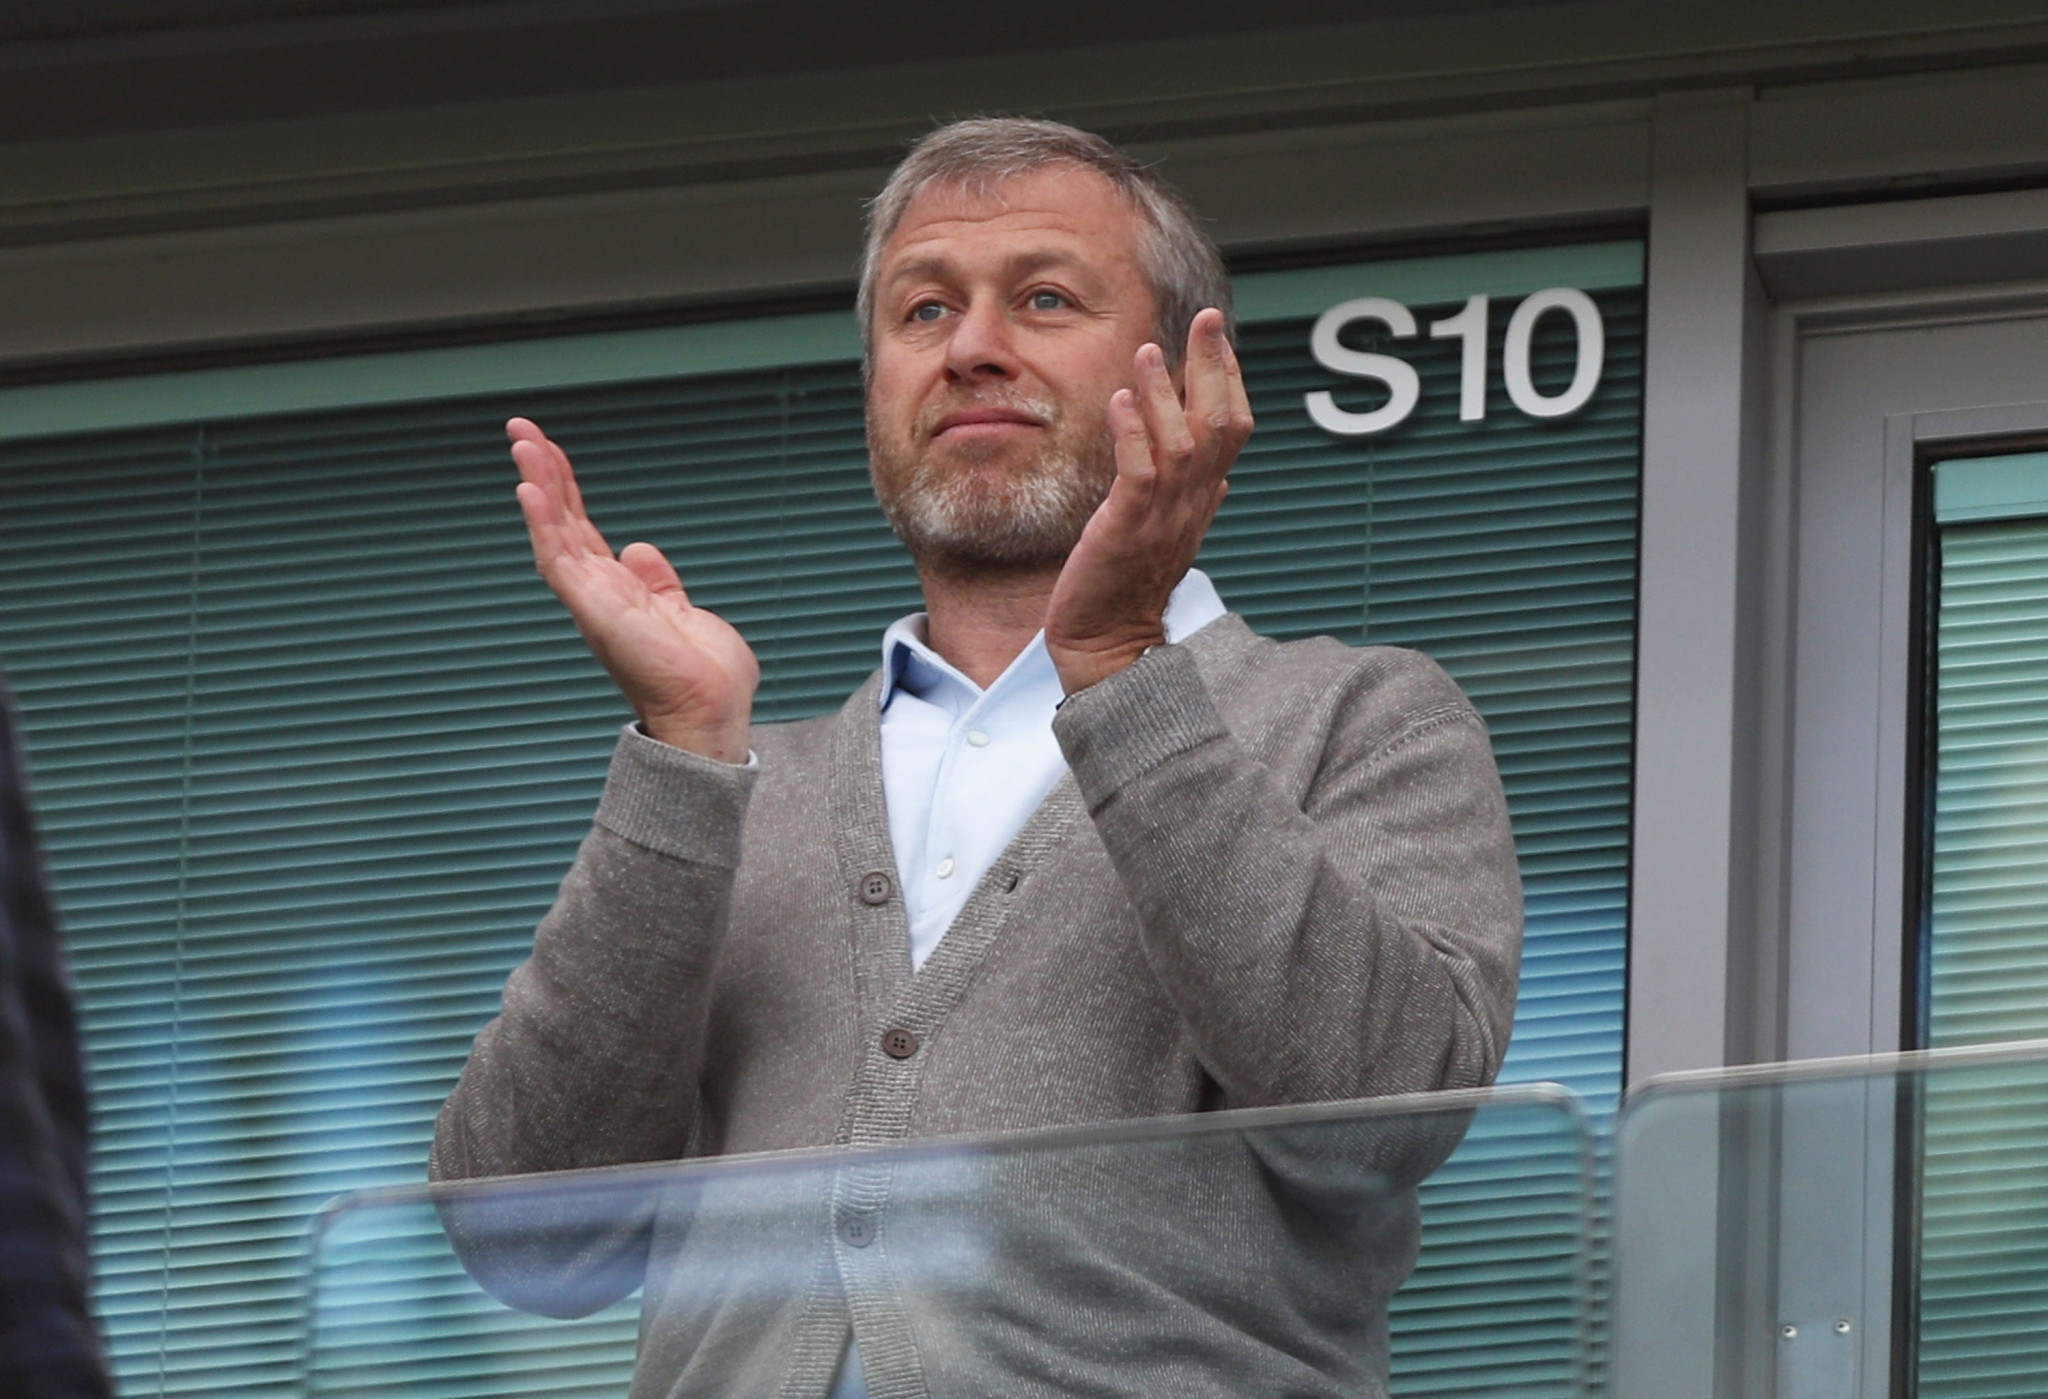 Russian oligarch Roman Abramovich agreed to set up a charitable foundation to benefit victims of the war in Ukraine ©Getty Images